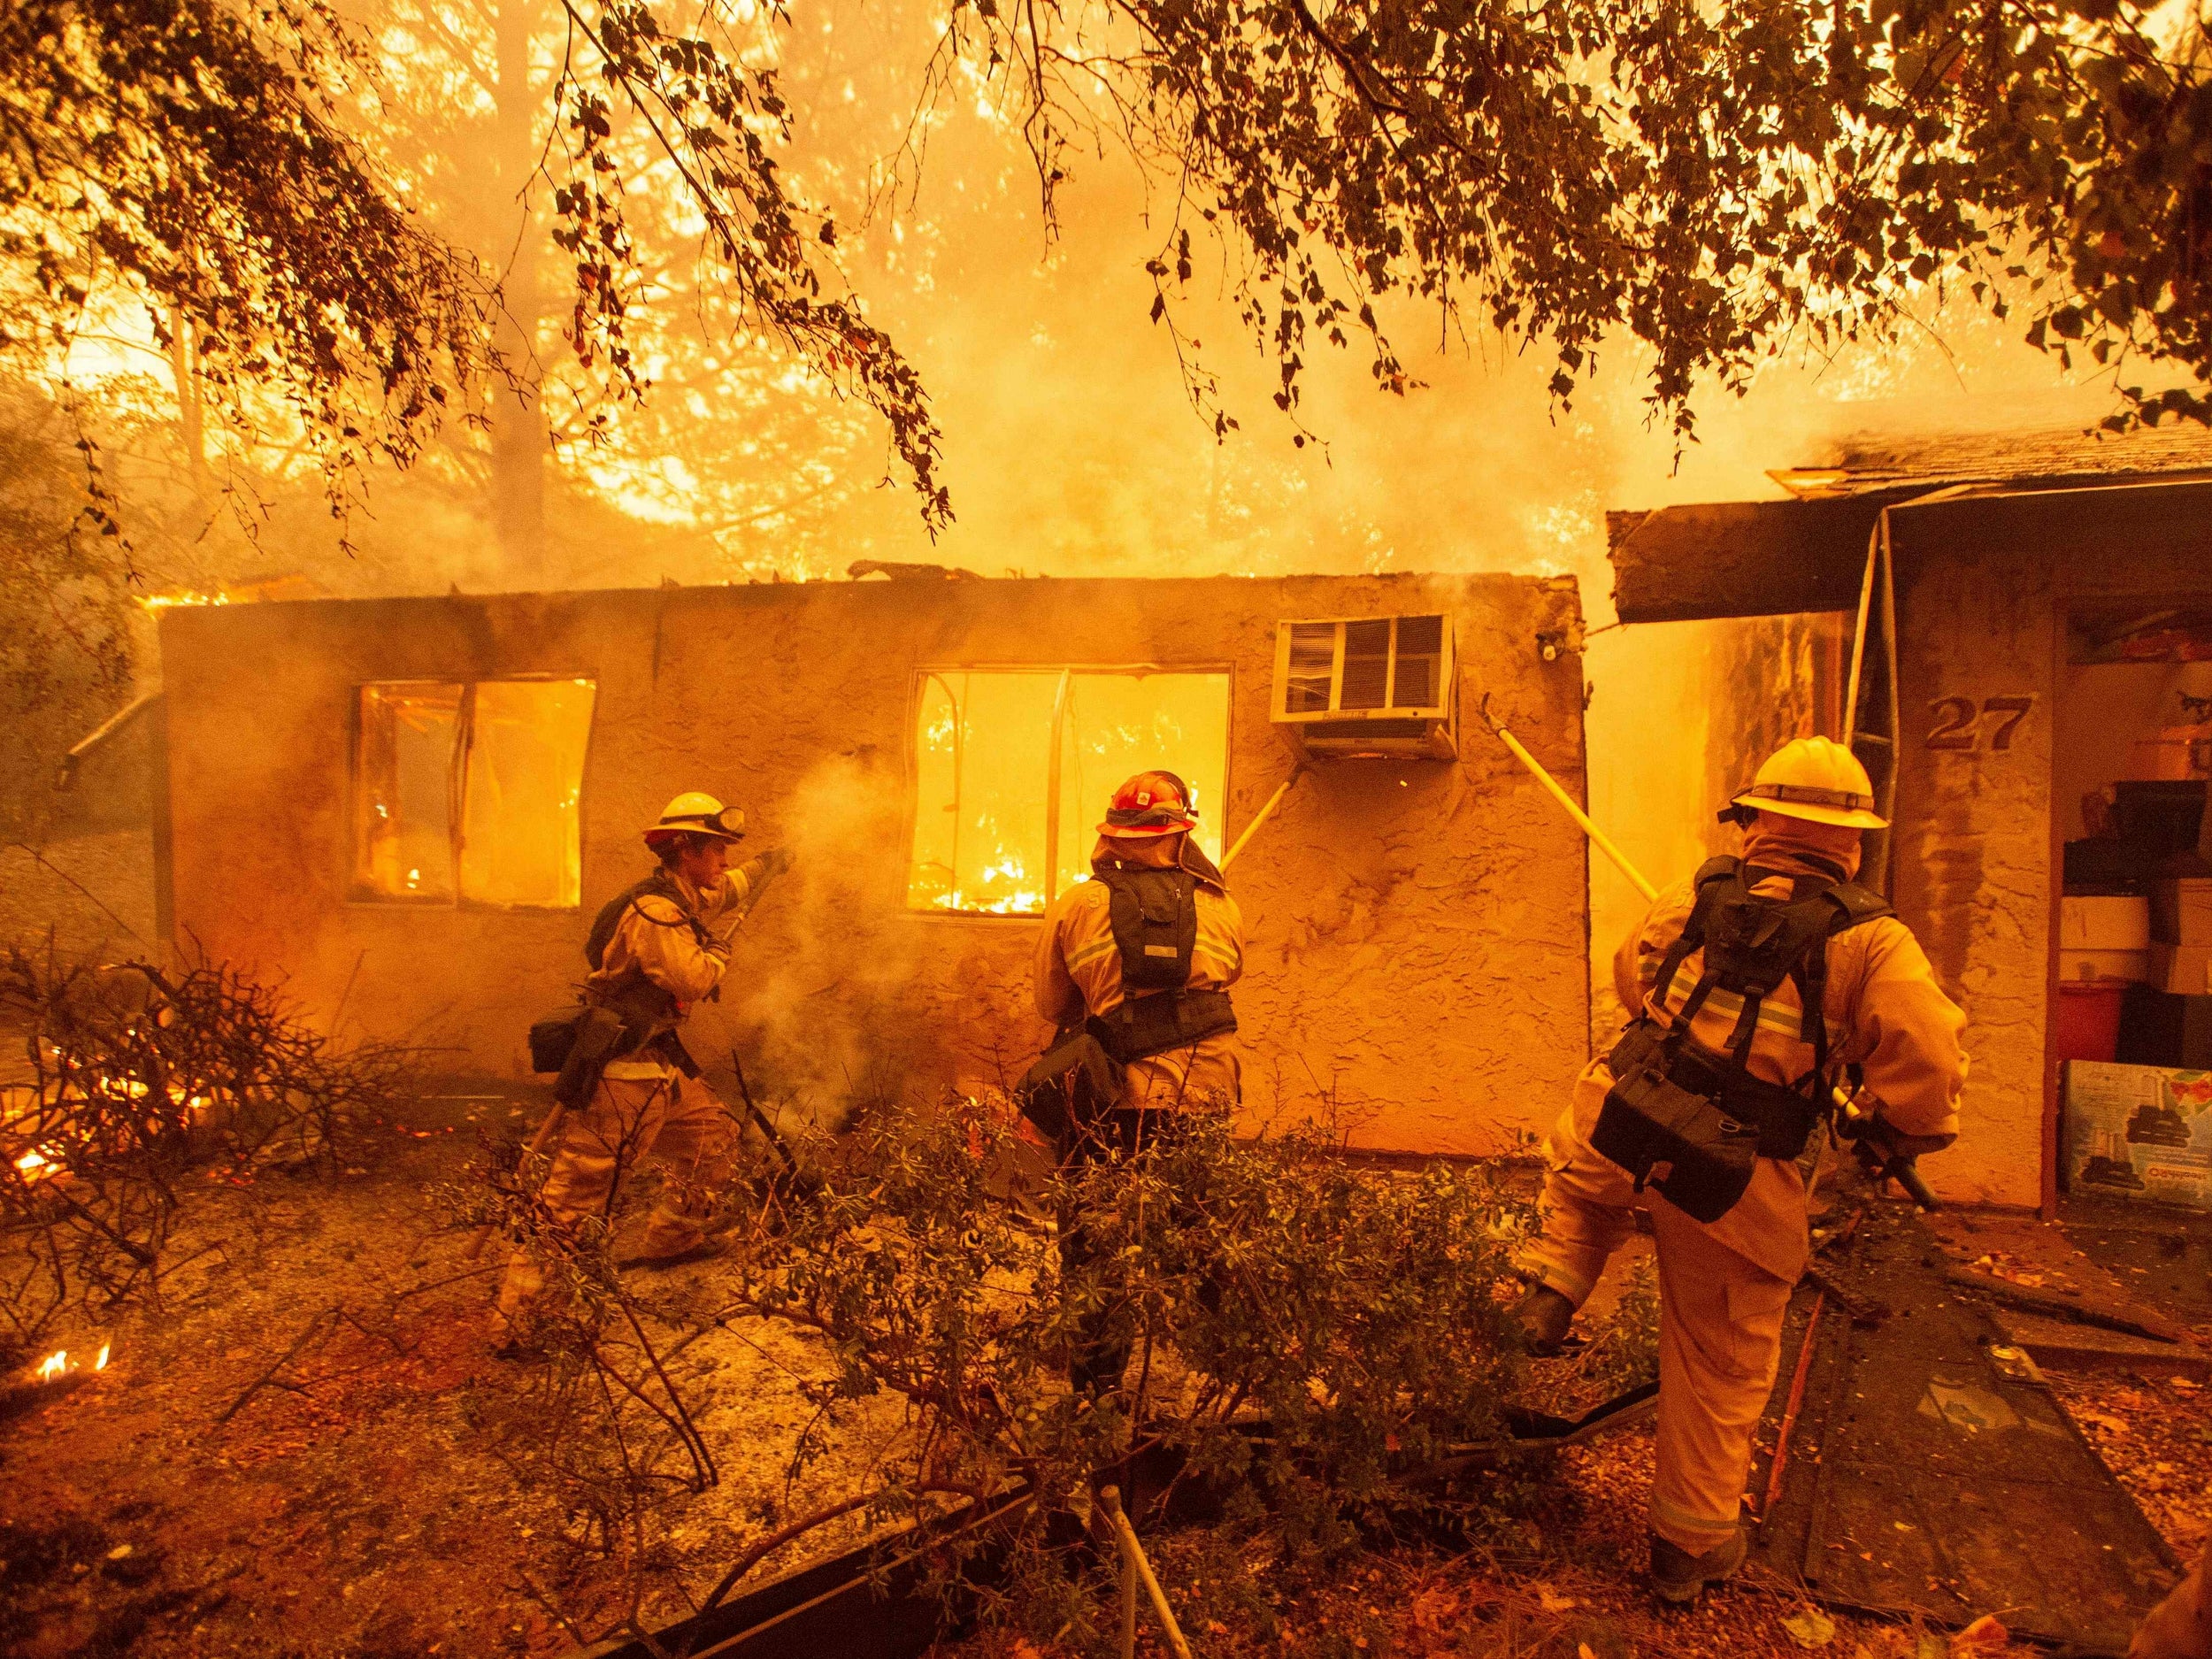 California wildfires: Death toll rises to 25 as firefighters continue search for survivors